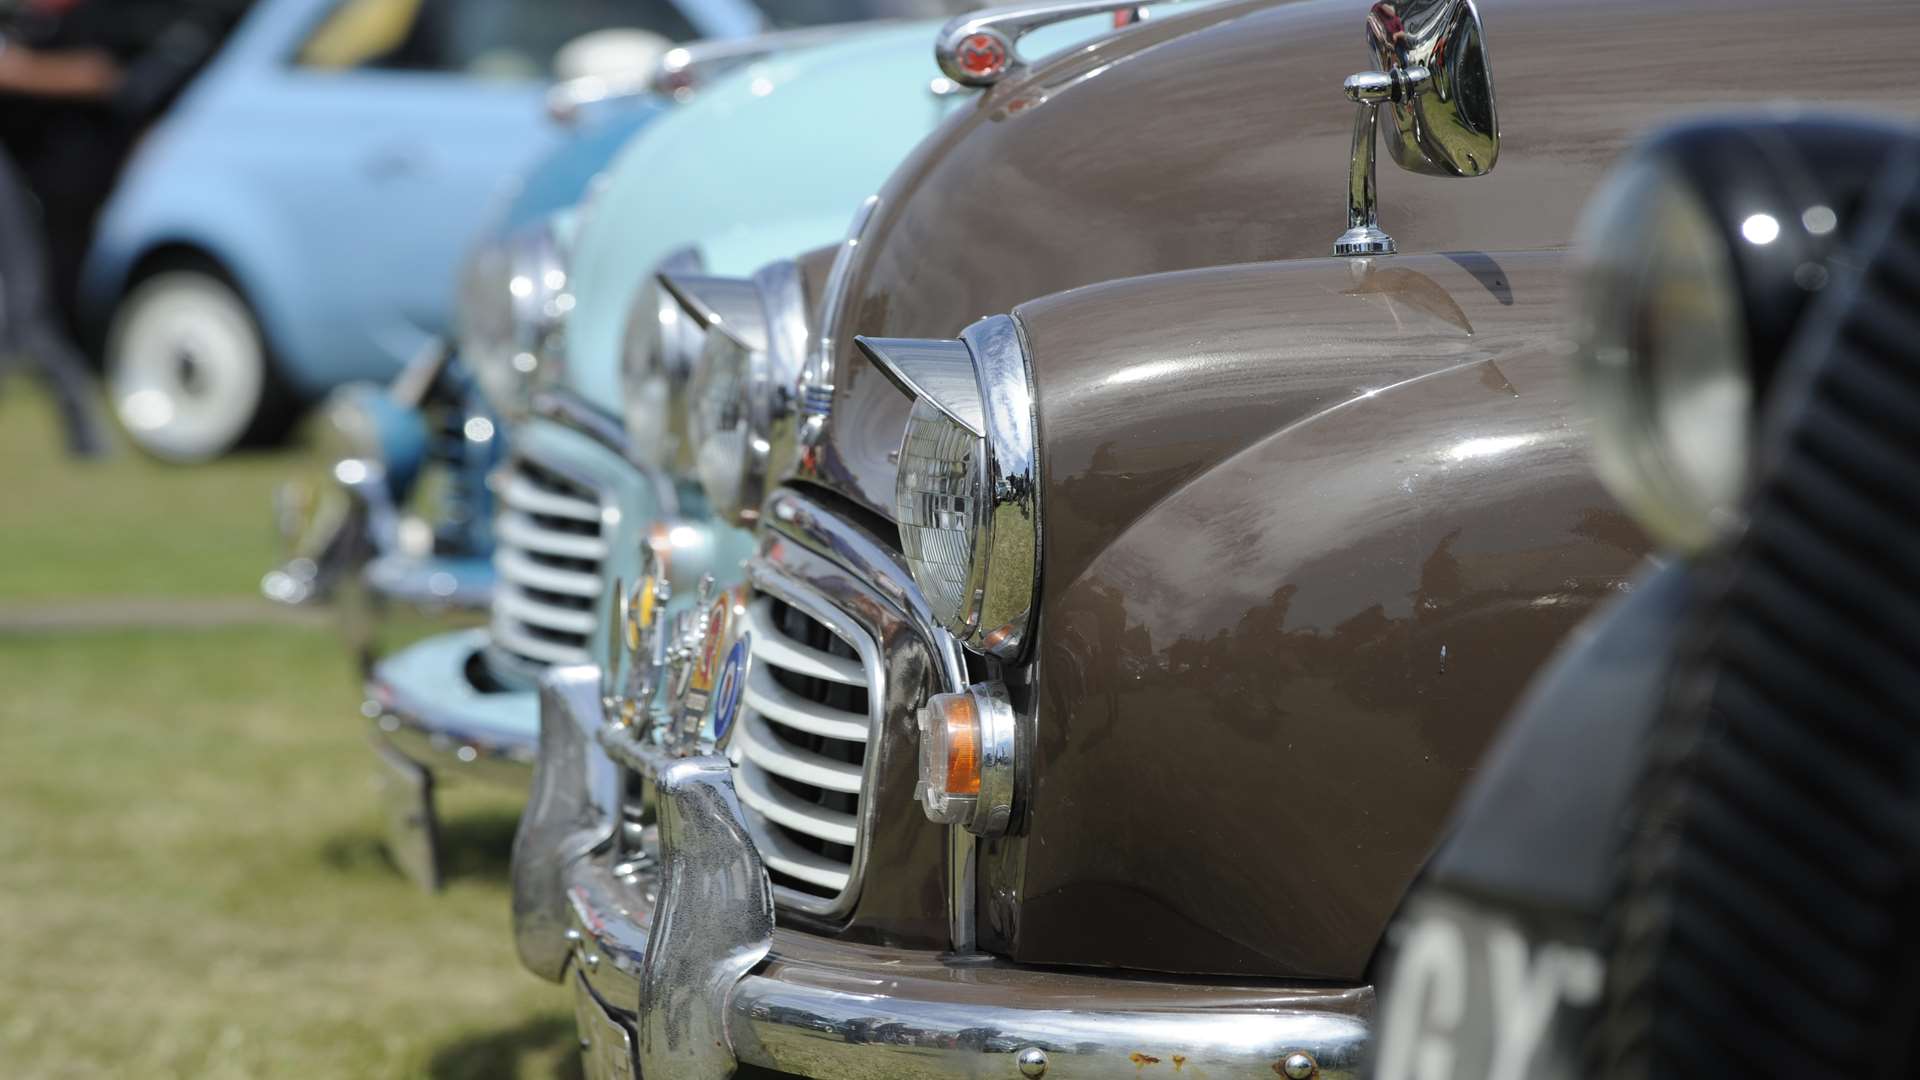 The Classic Motor Show on Walmer Green at Deal